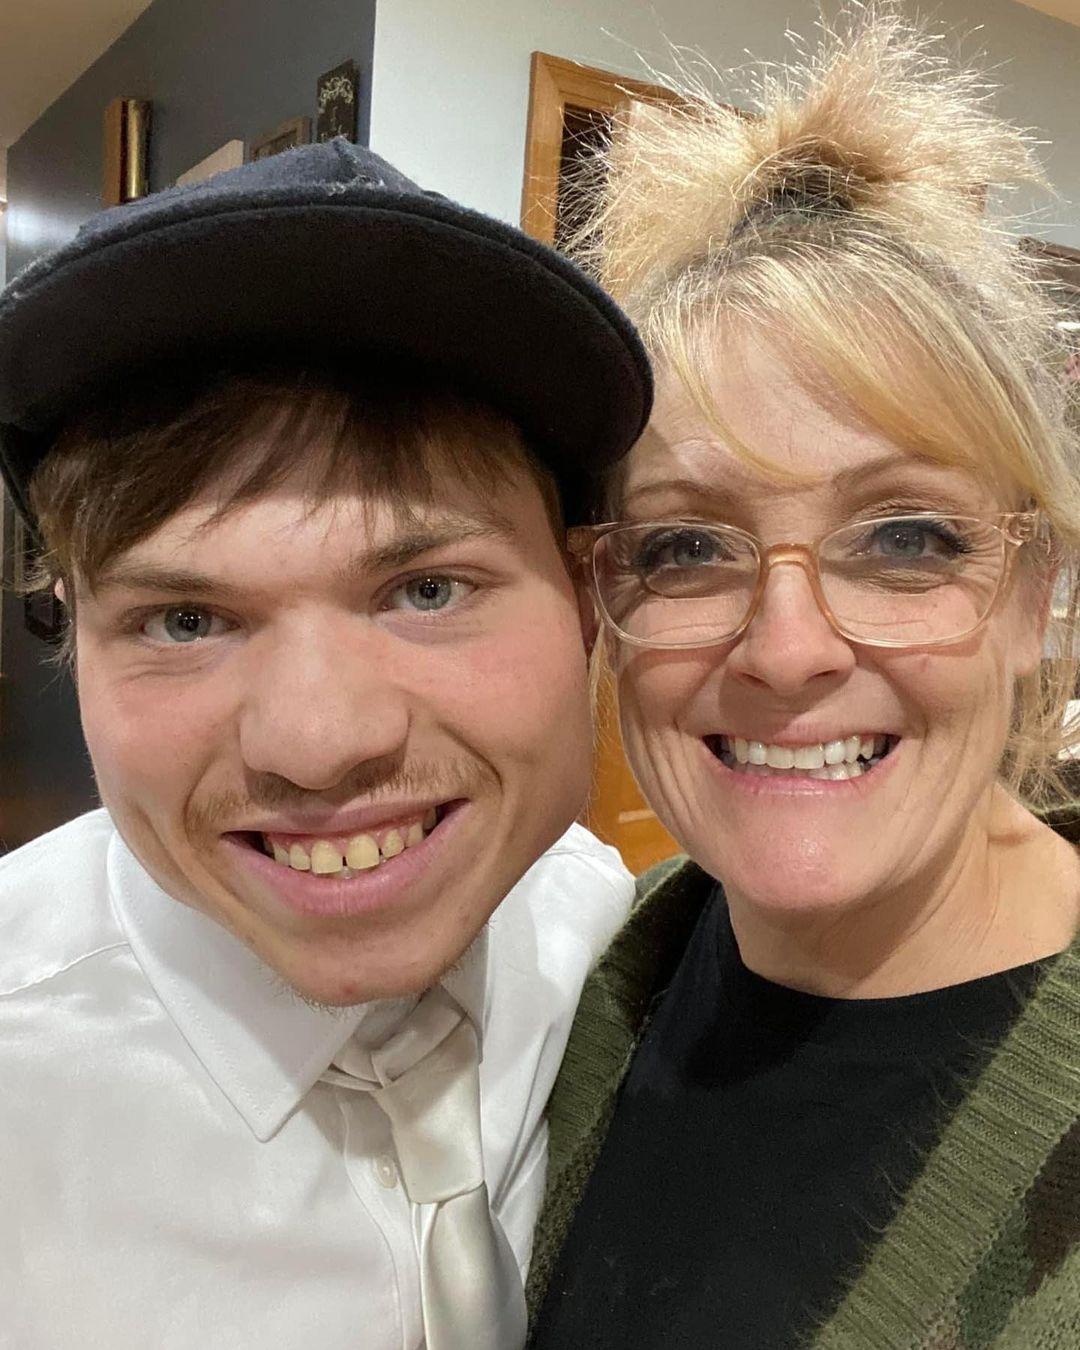 Joshua with his mother, Heather. (Courtesy of <a href="https://www.instagram.com/justthebells10/">Heather Bell</a>)